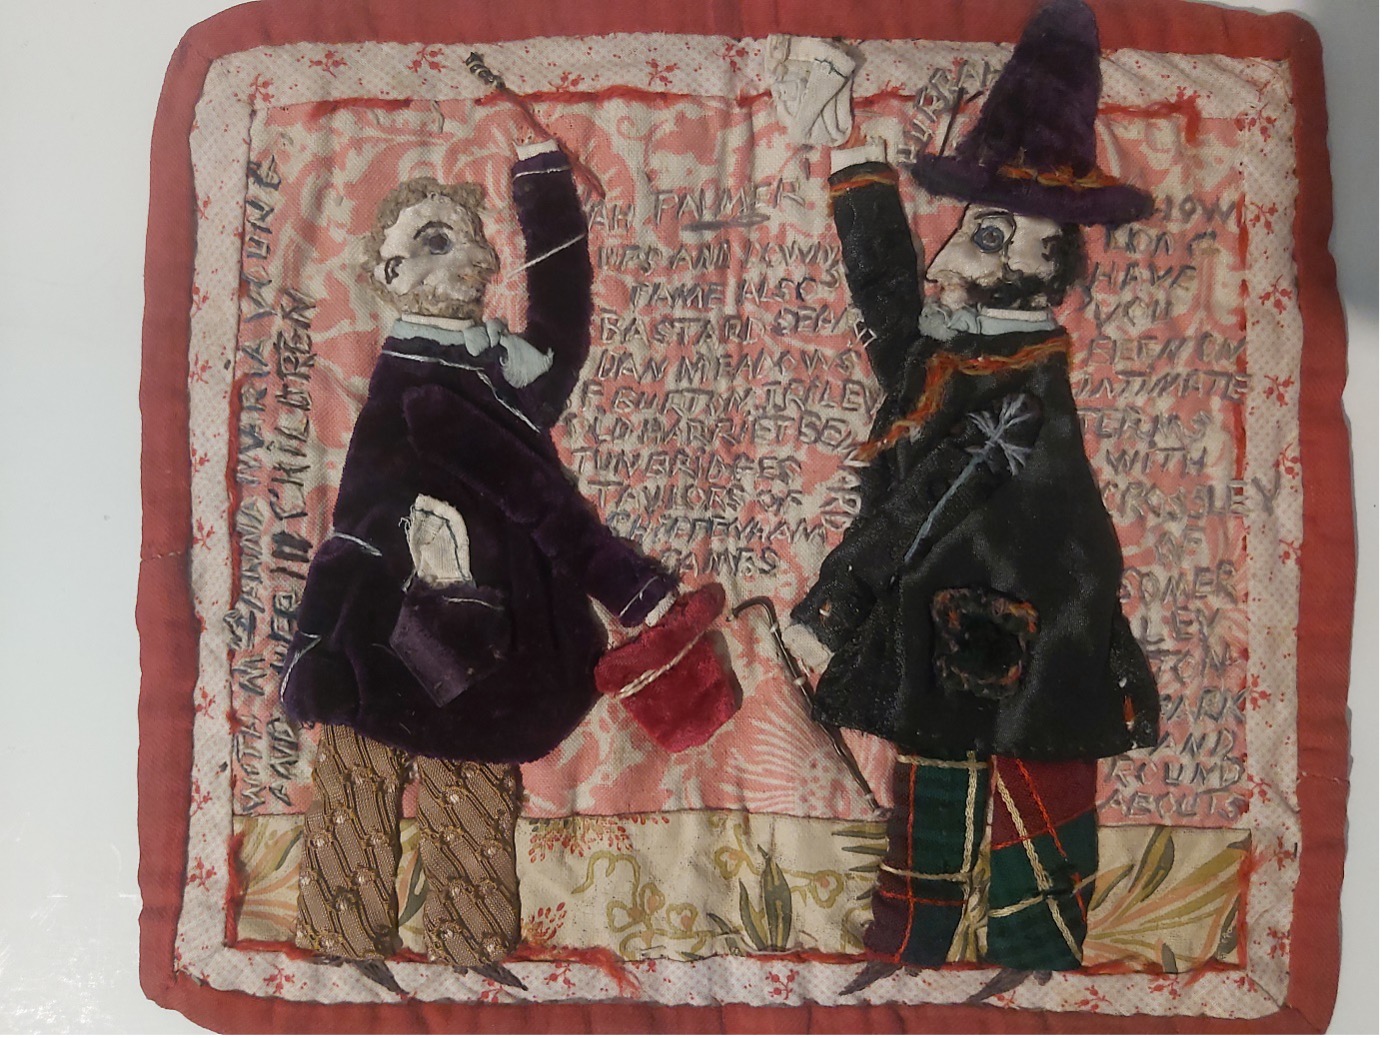 A fabric sewn artwork with two men wearing coats and trousers one with a pointed hat